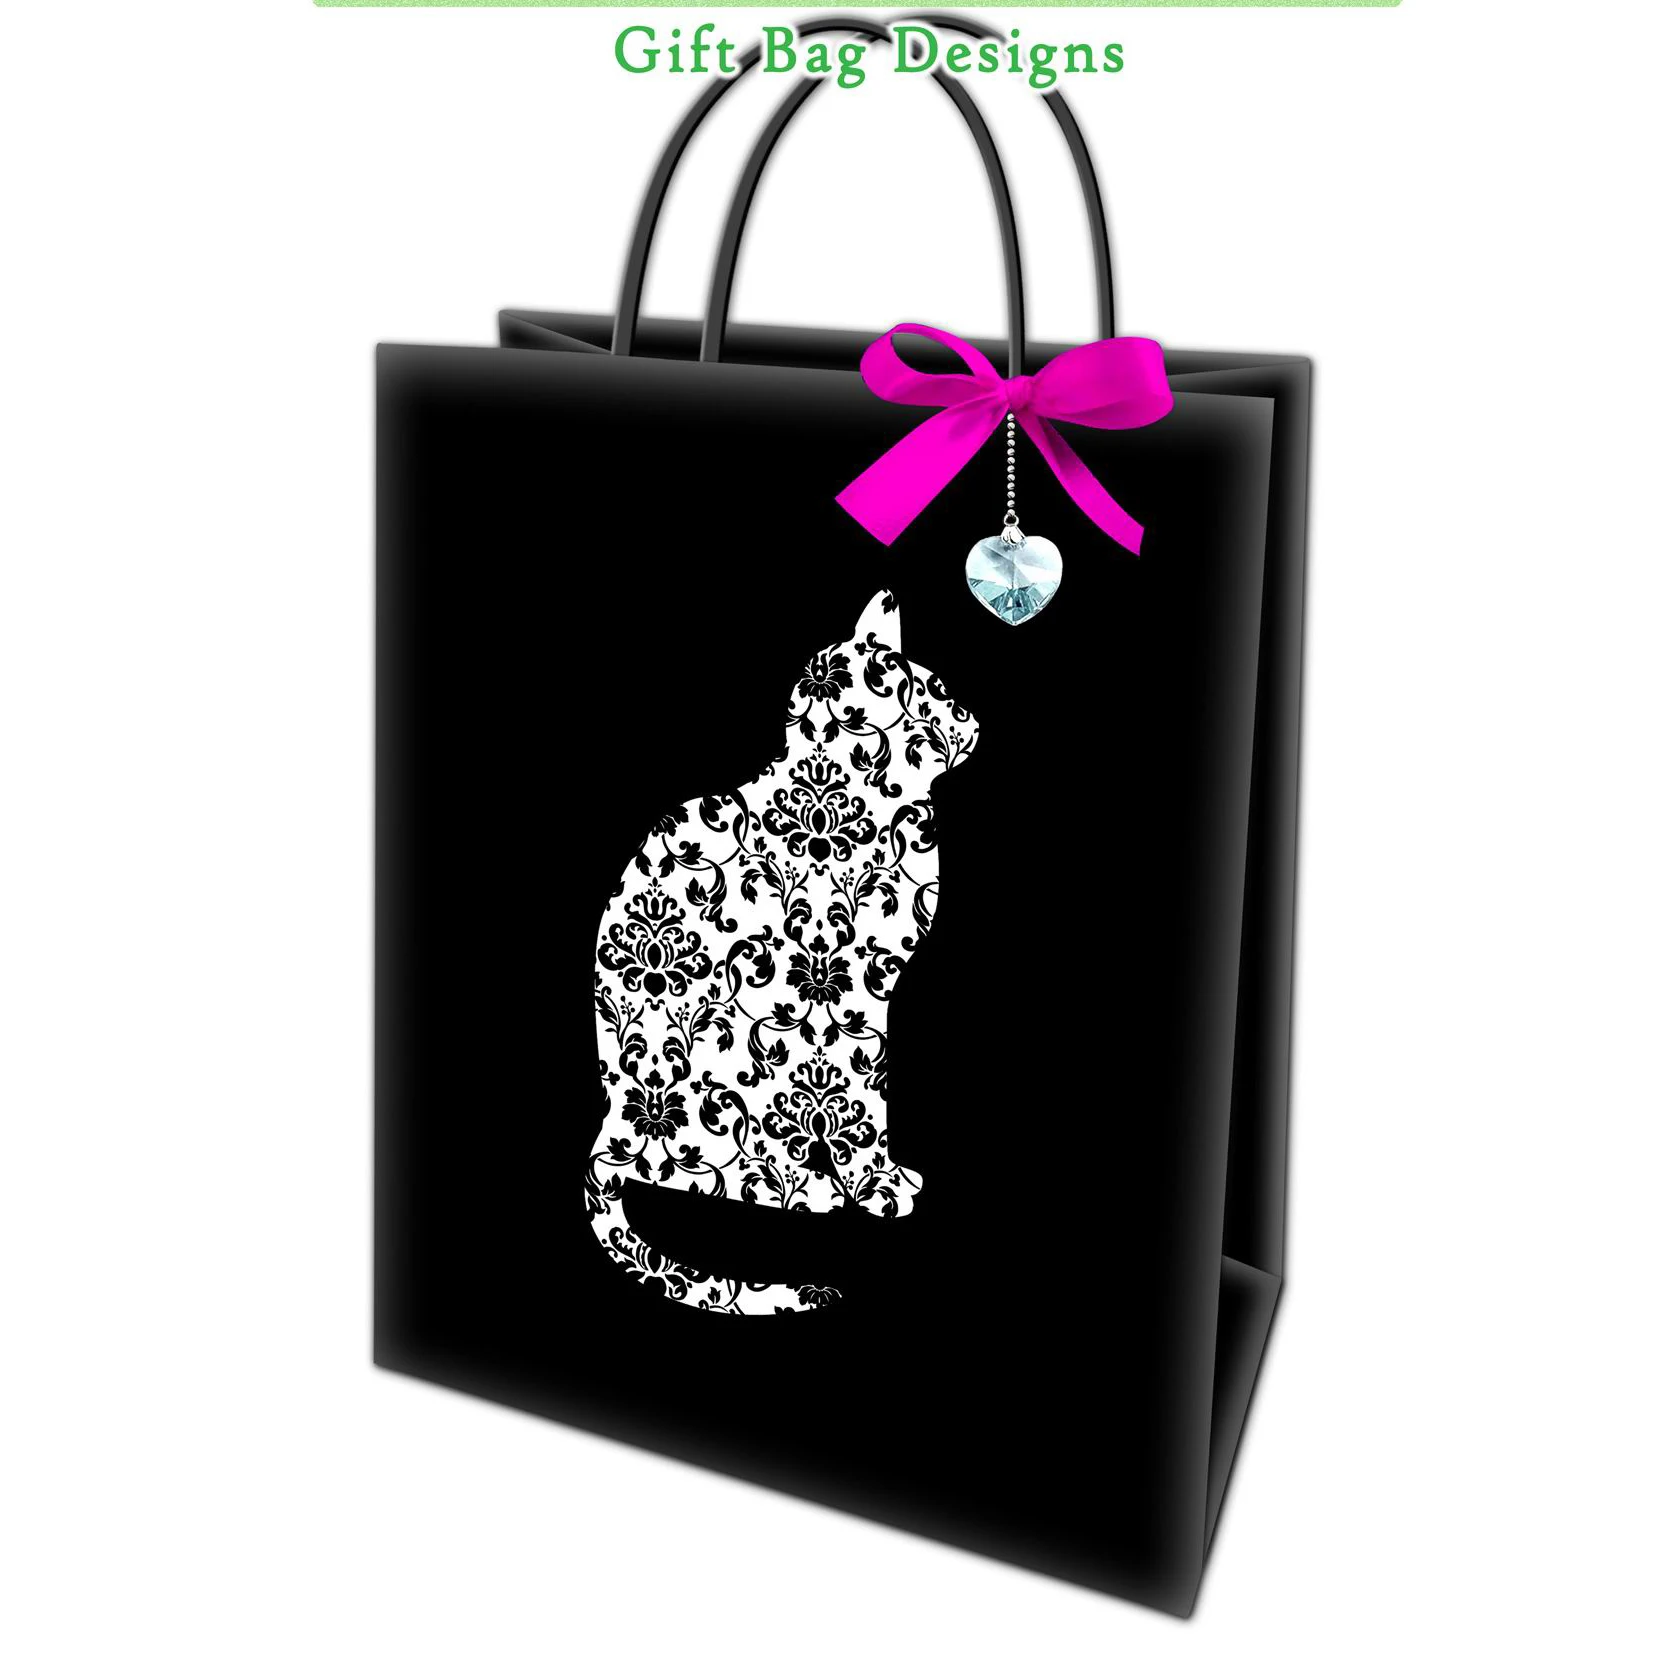 Eco-Friendly custom printed gift bags wholesale supply for packing birthday gifts